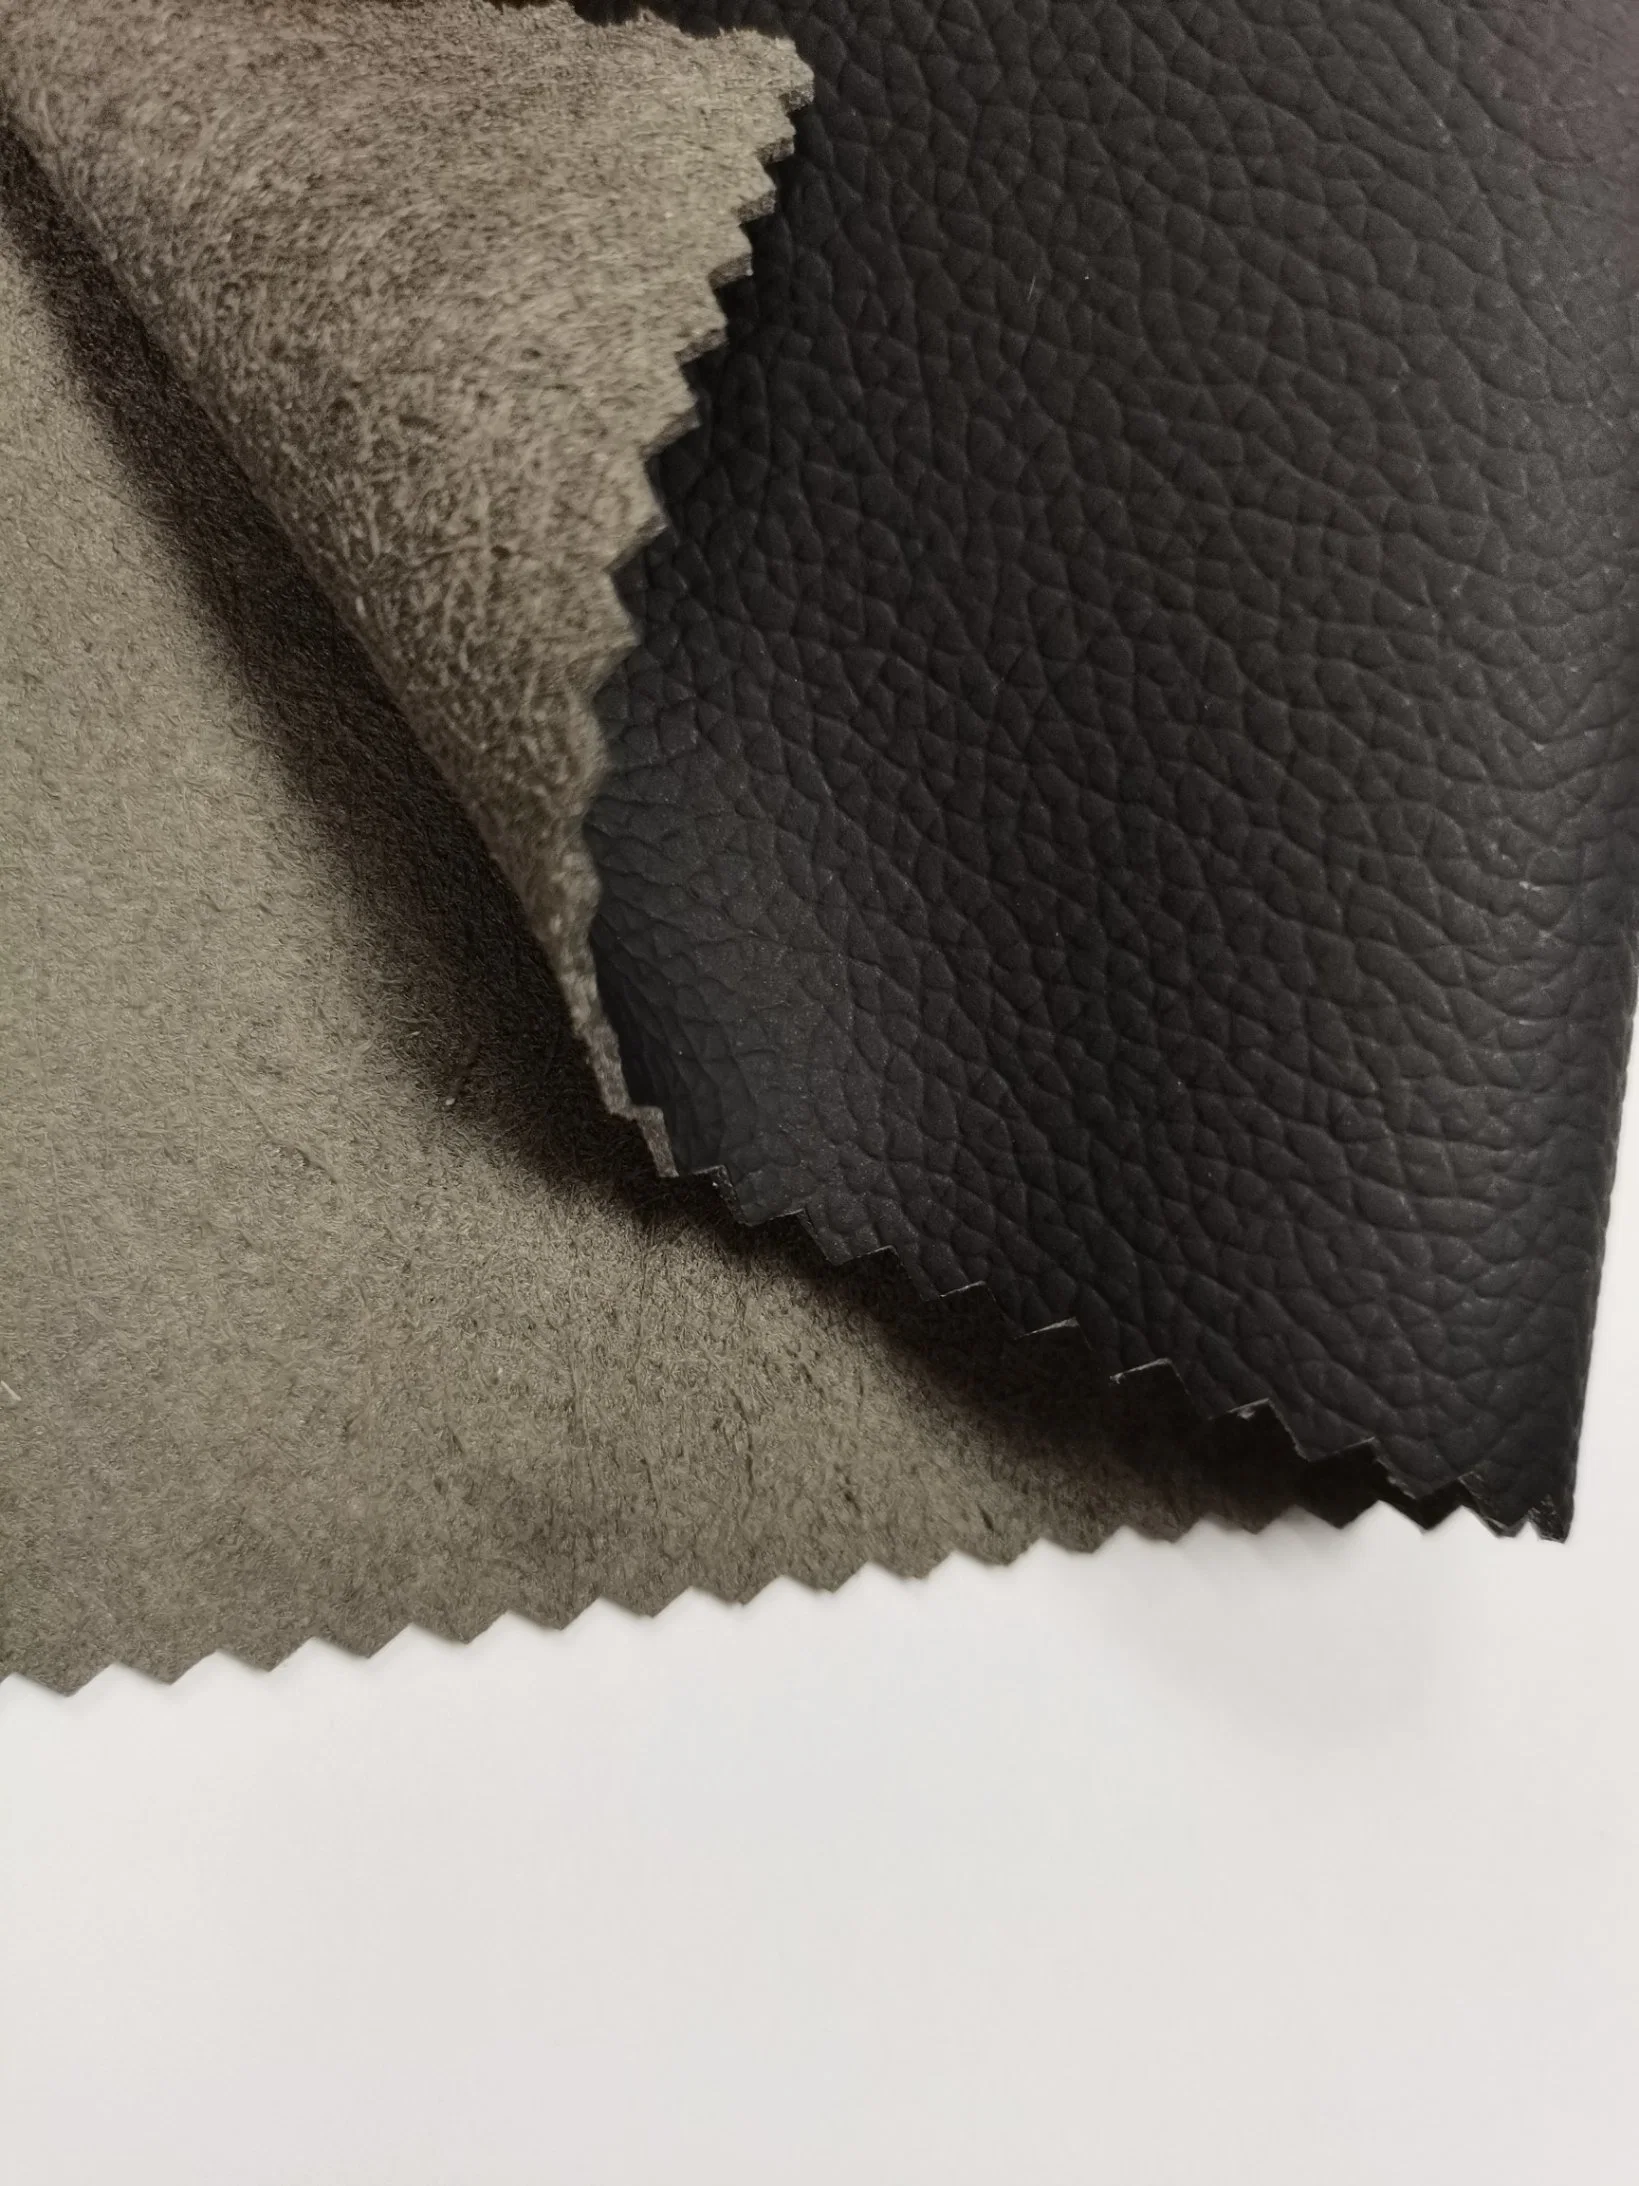 Synthetic Textile Leather Automotive, Huafon High Quality Fire Proof Microfibre Leather